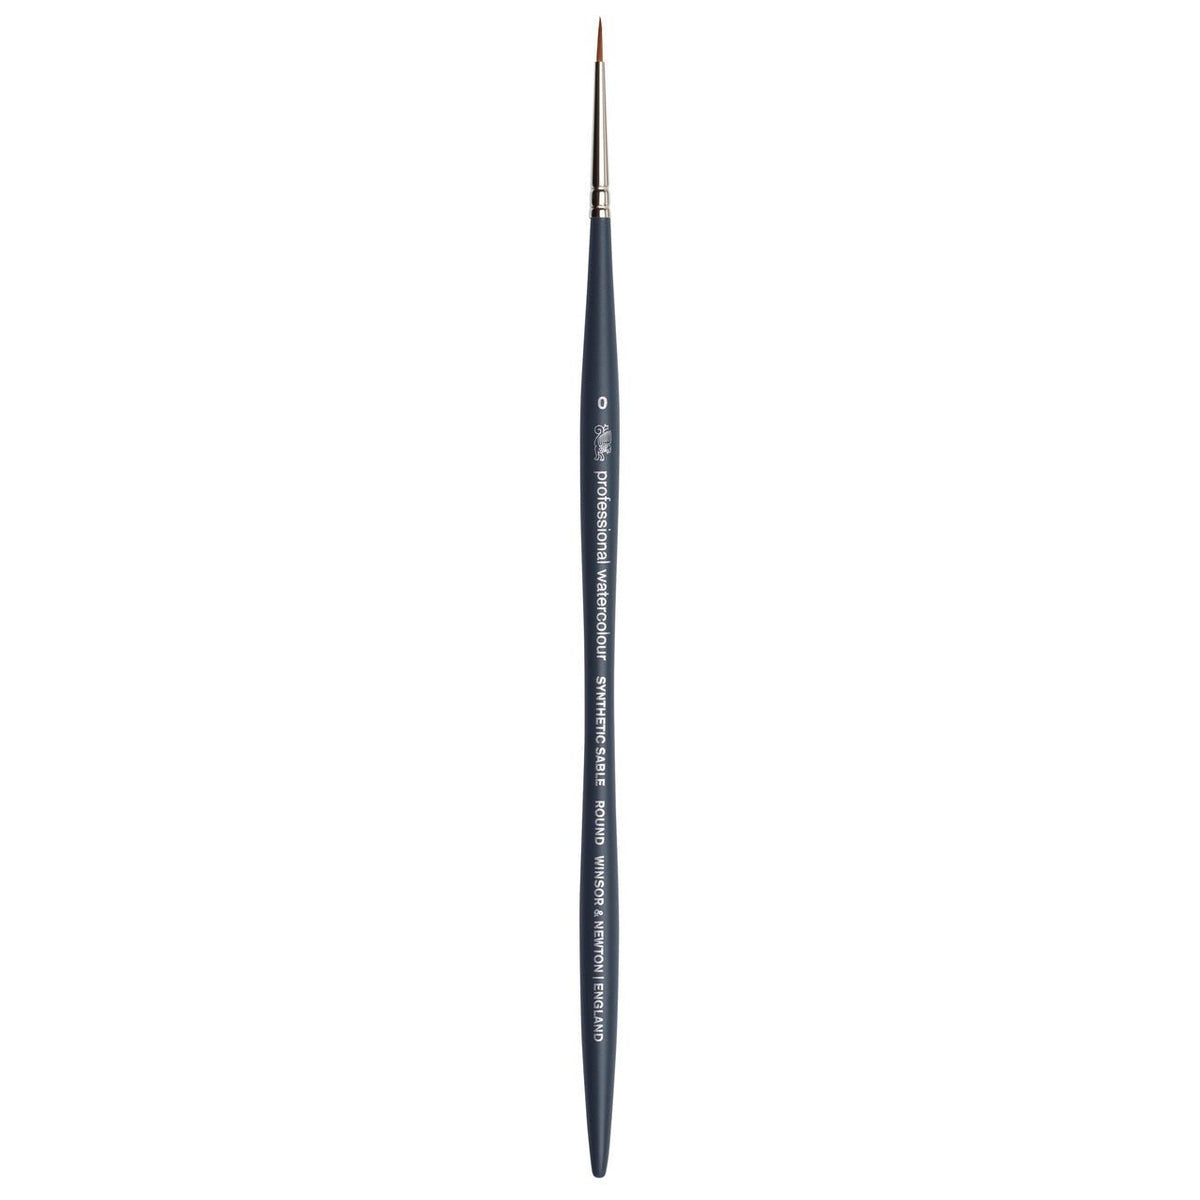 Winsor & Newton Professional Watercolor Synthetic Sable Brush - Round 0 - merriartist.com